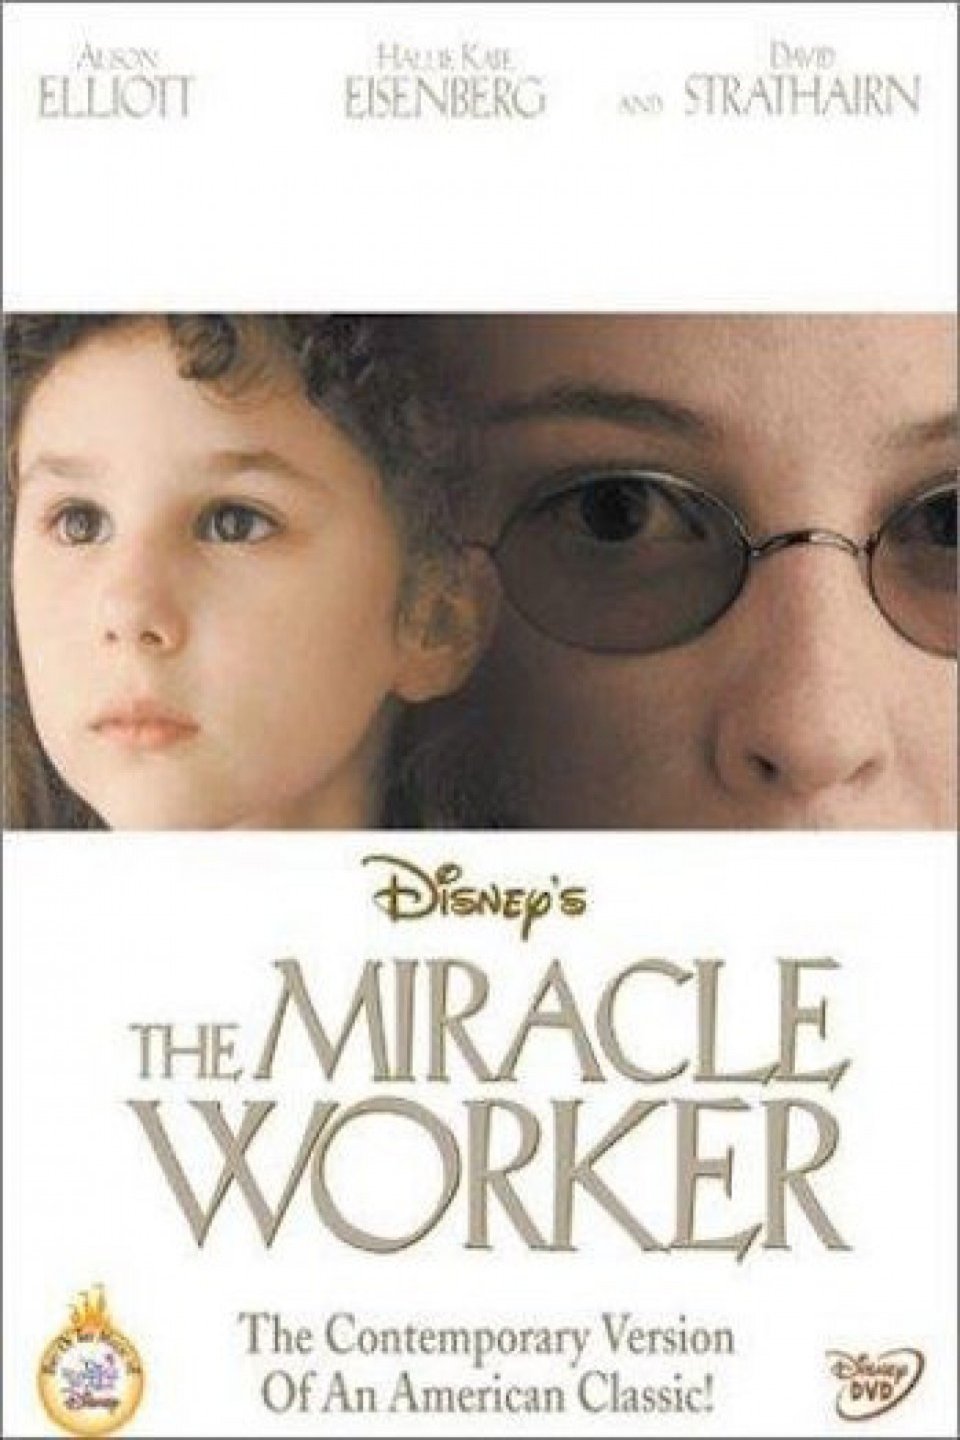 L'affiche du film The Miracle Worker